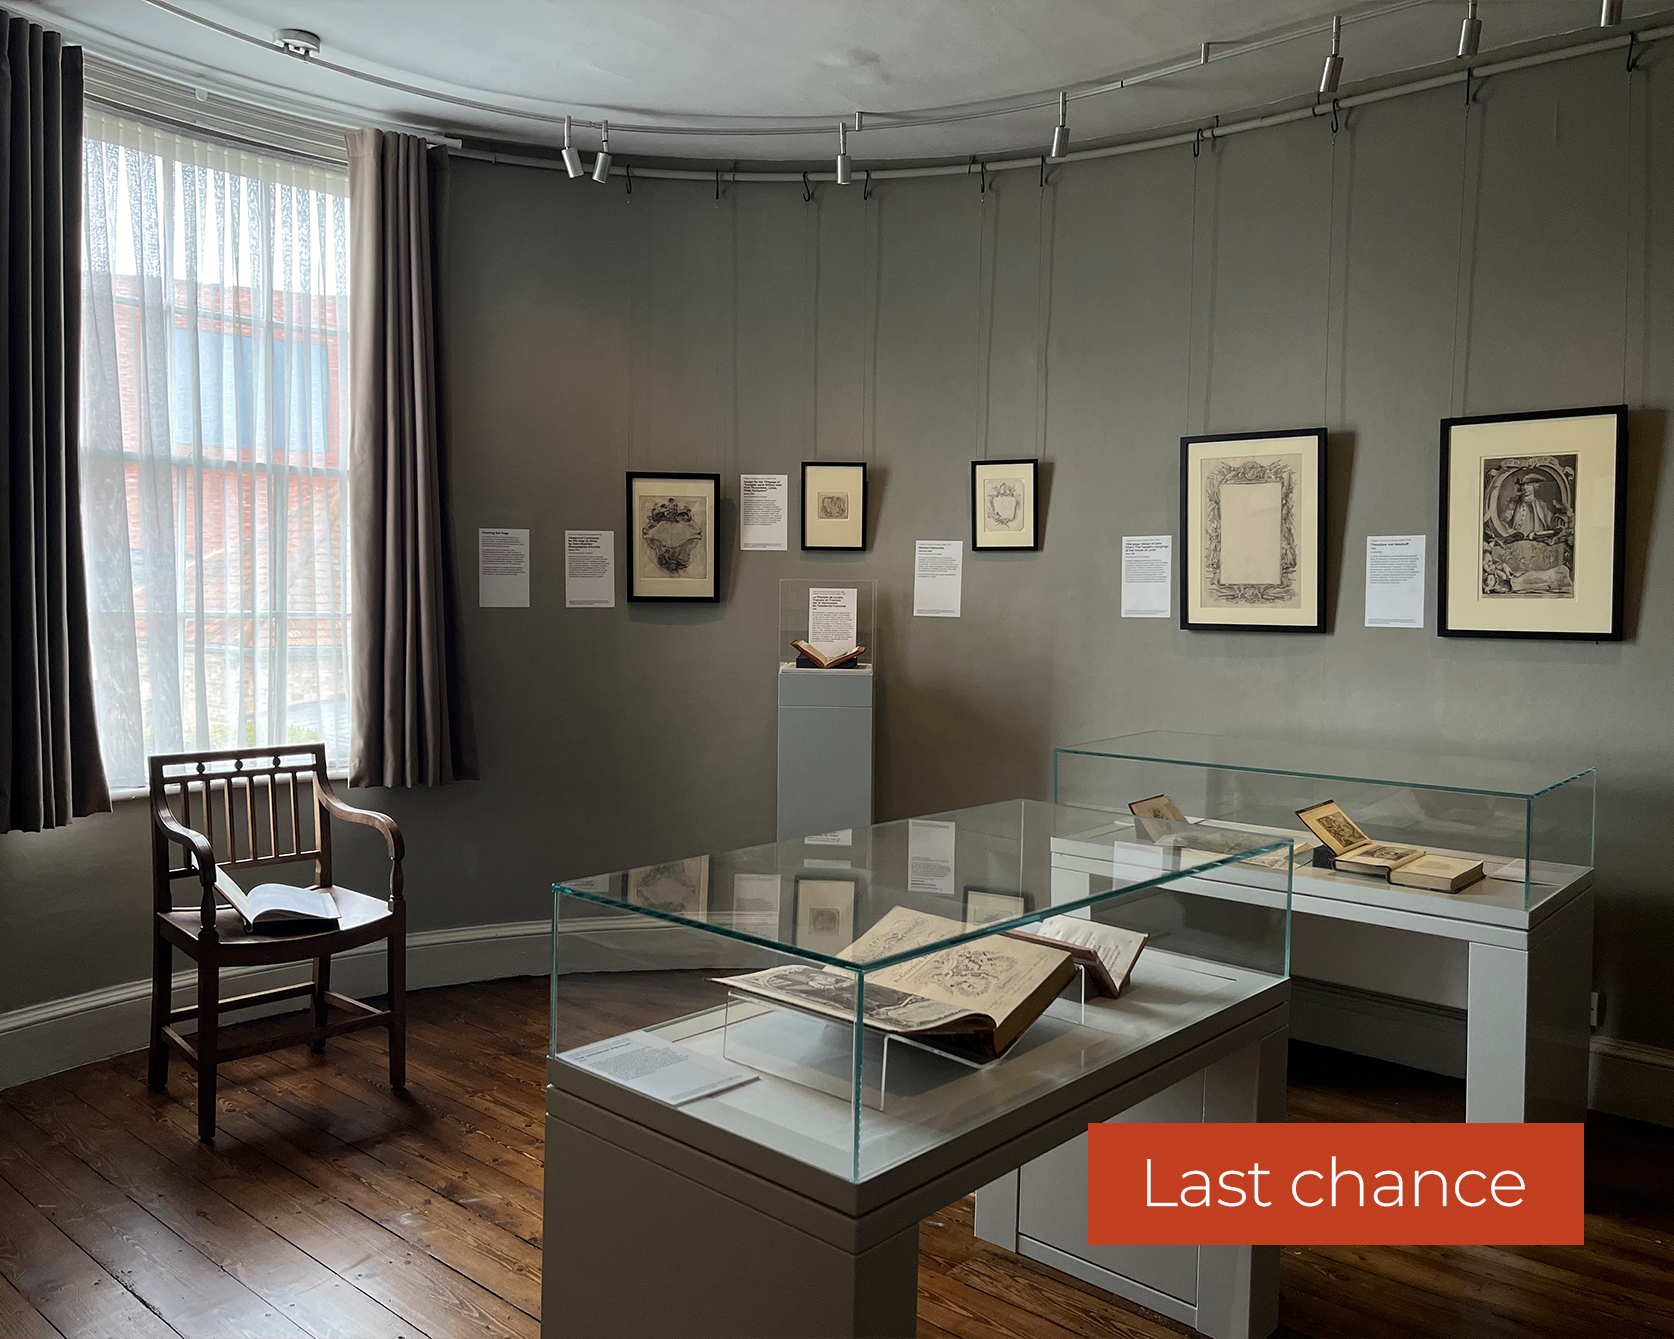 An image of the Hubert-François Gravelot: Designing the Georgian Book exhibition in the David Pike Drawings Gallery at Gainsborough's House. There is an overlayed banner in the bottom right corner which reads: Last chance.